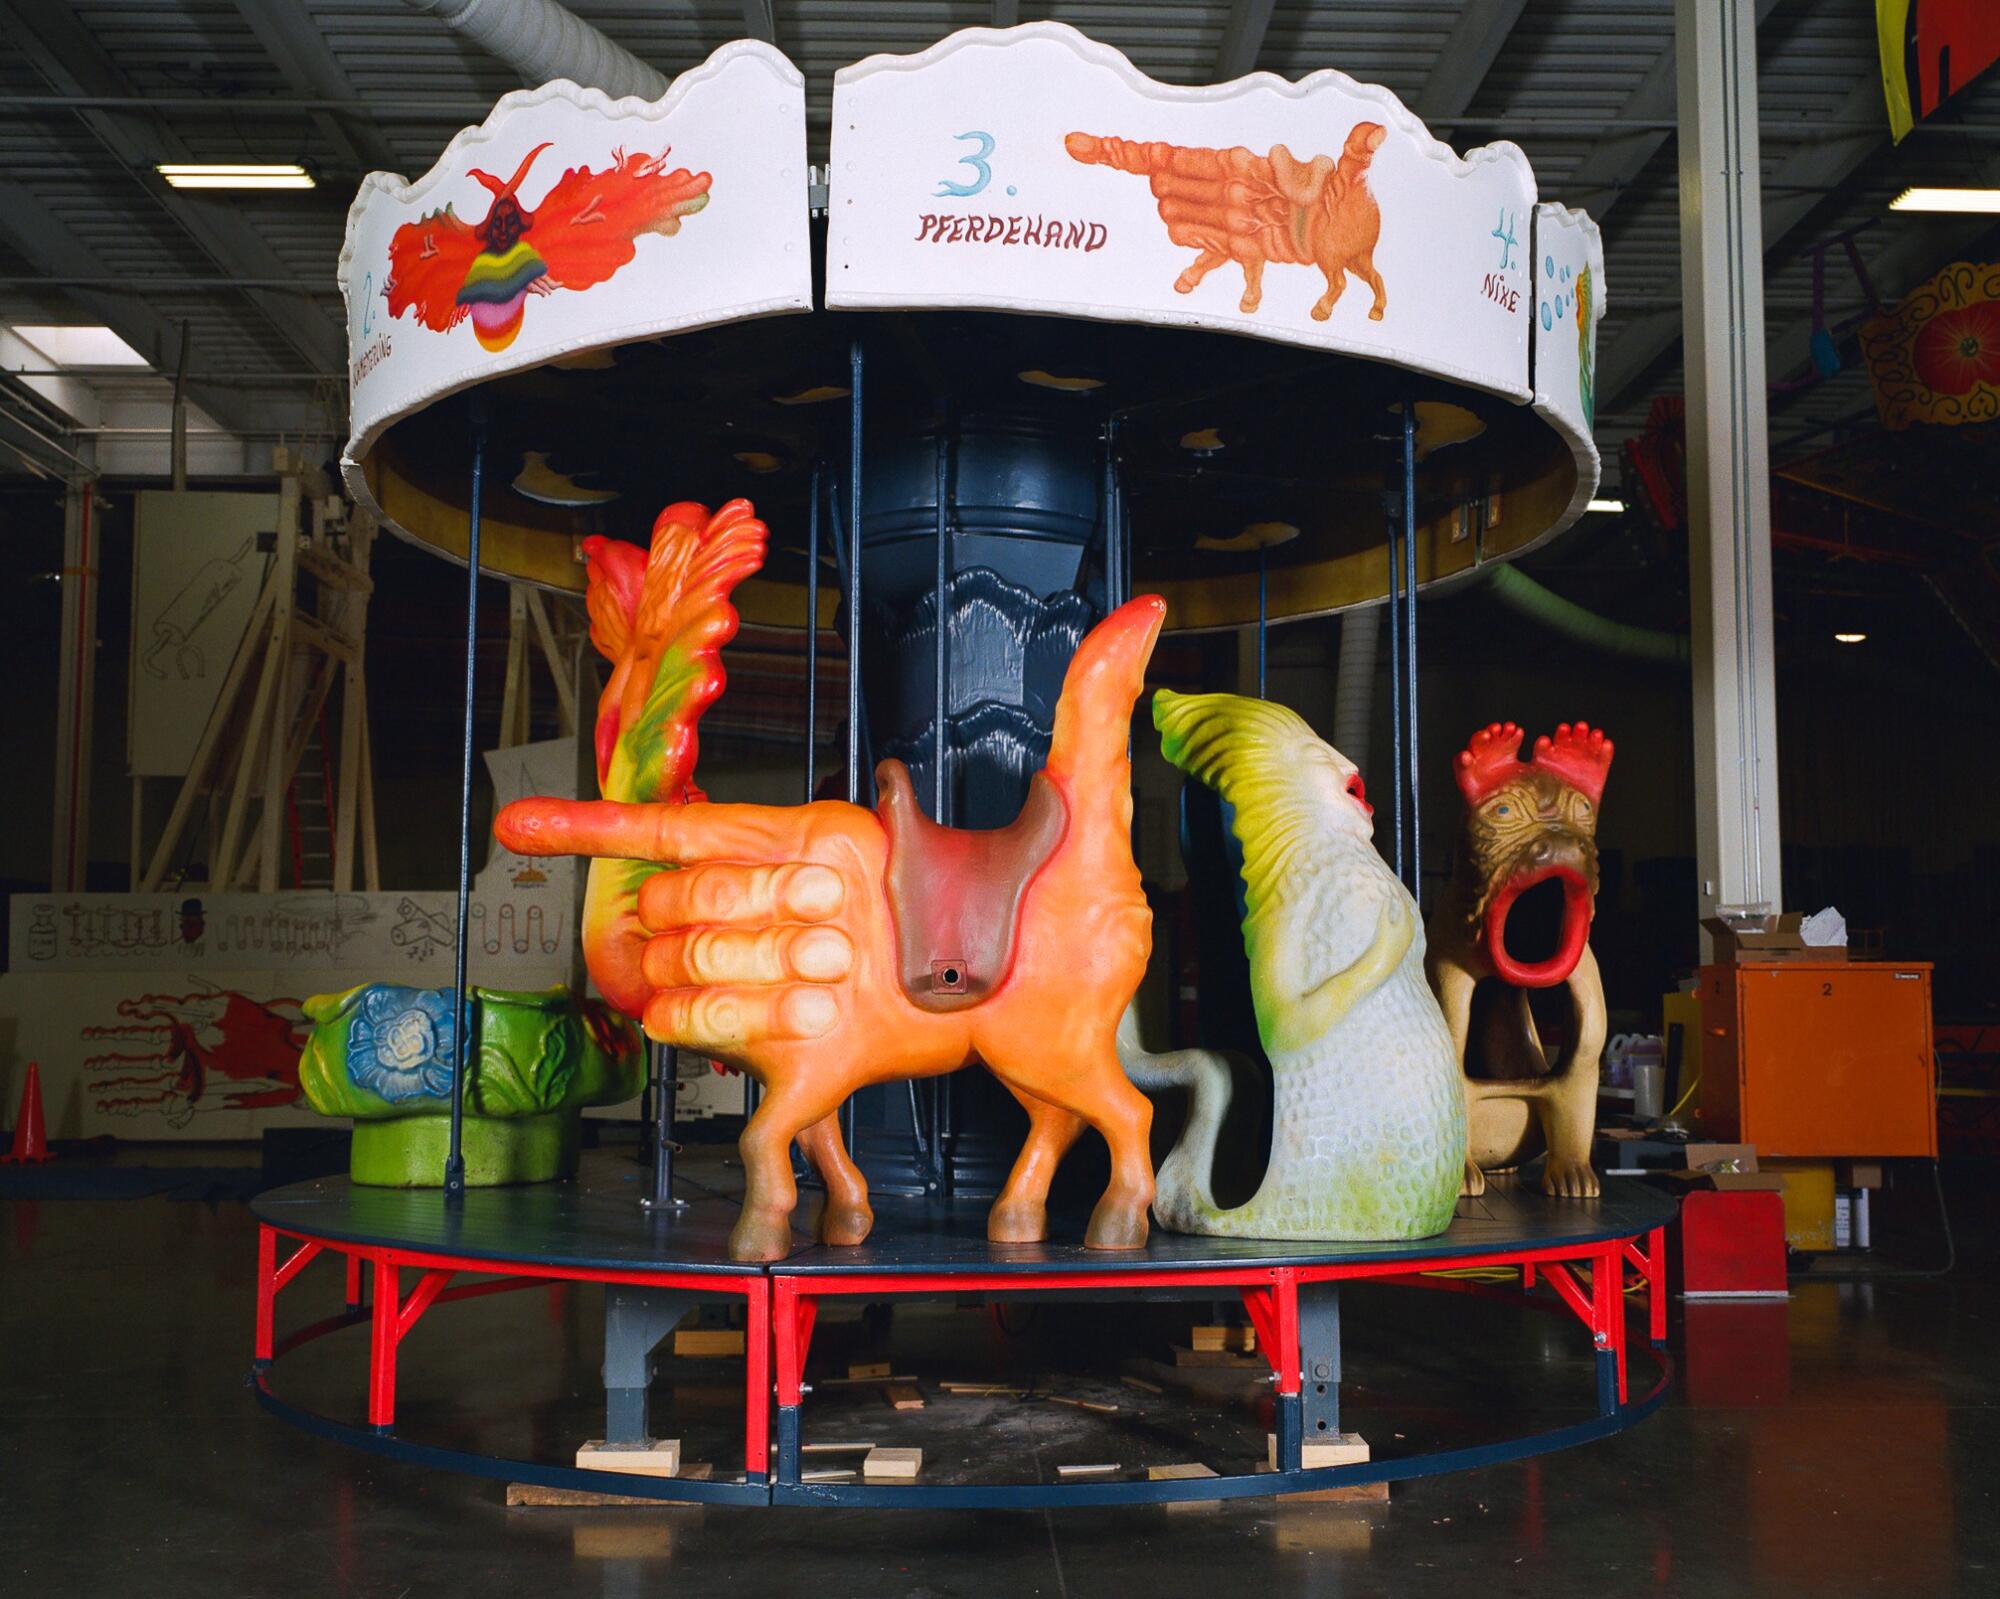 Arik Brauer's carousel features a striking, giant orange hand in a trigger position. 